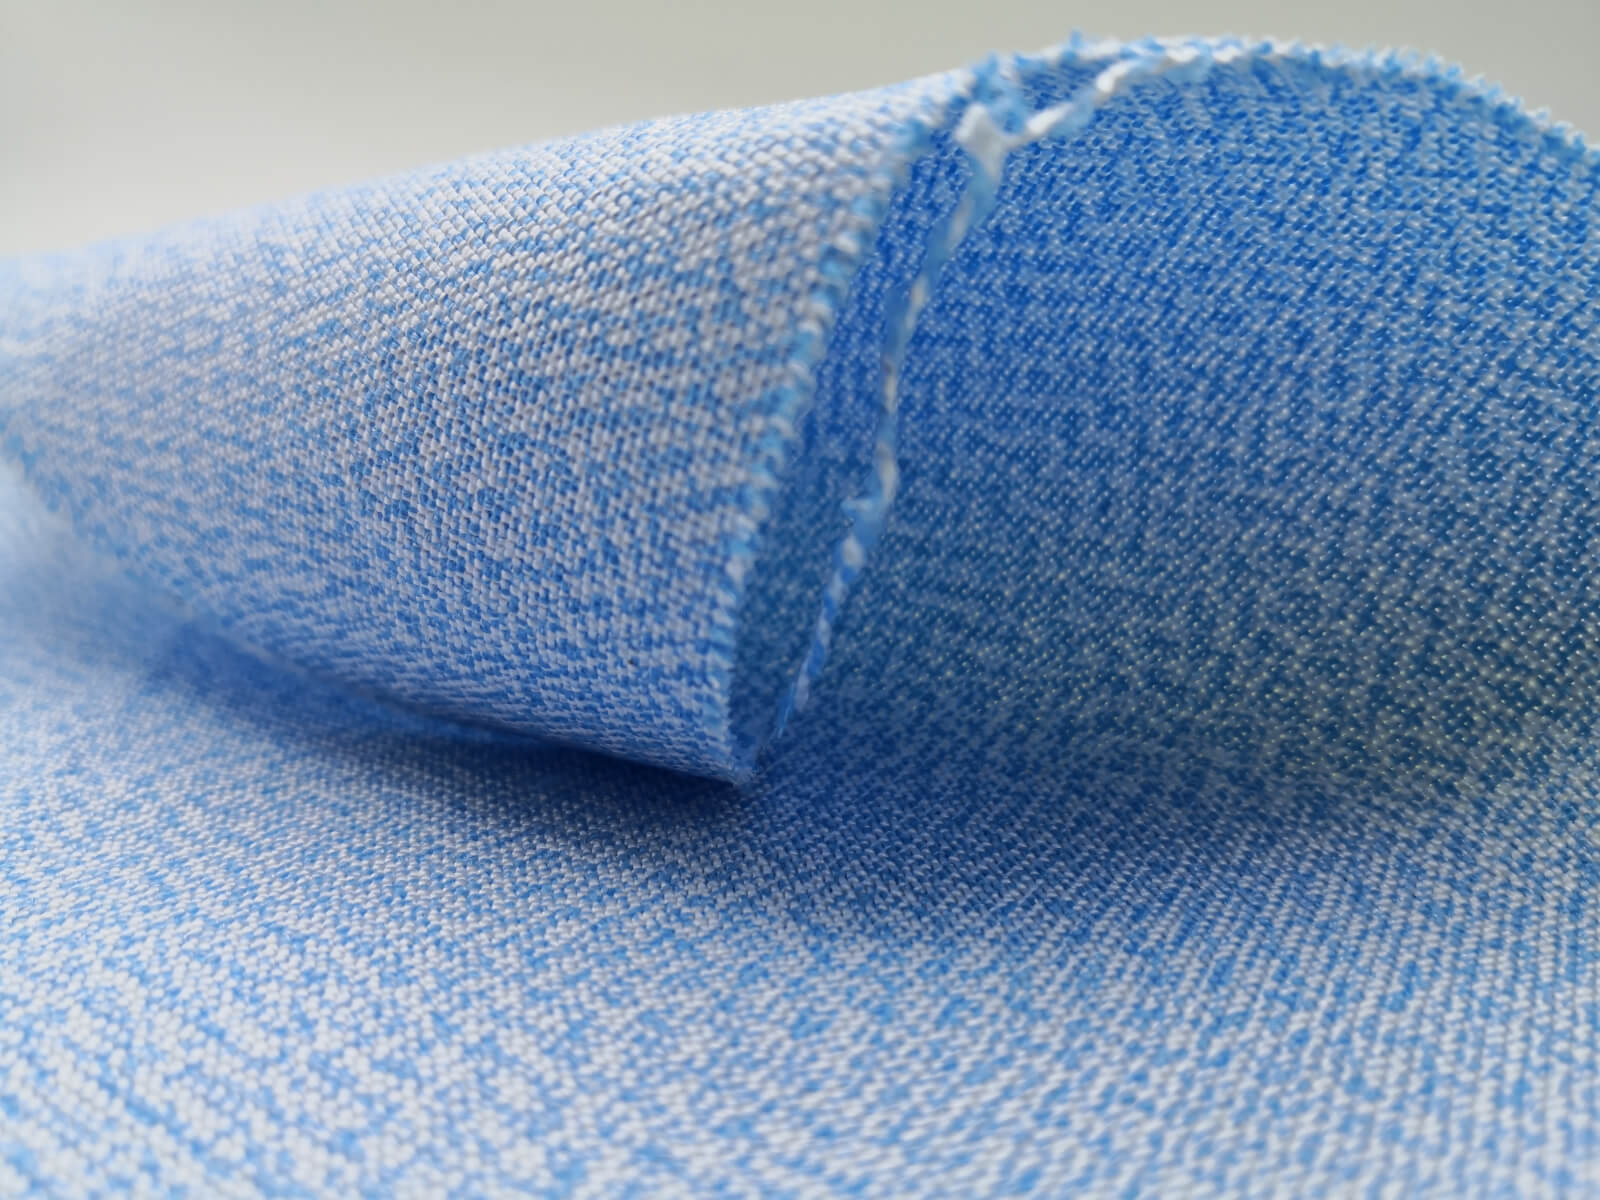 UHMWPE Cut Resistant Plain Woven Fabric in Blue ANSI A4 EN388 Level5 ...